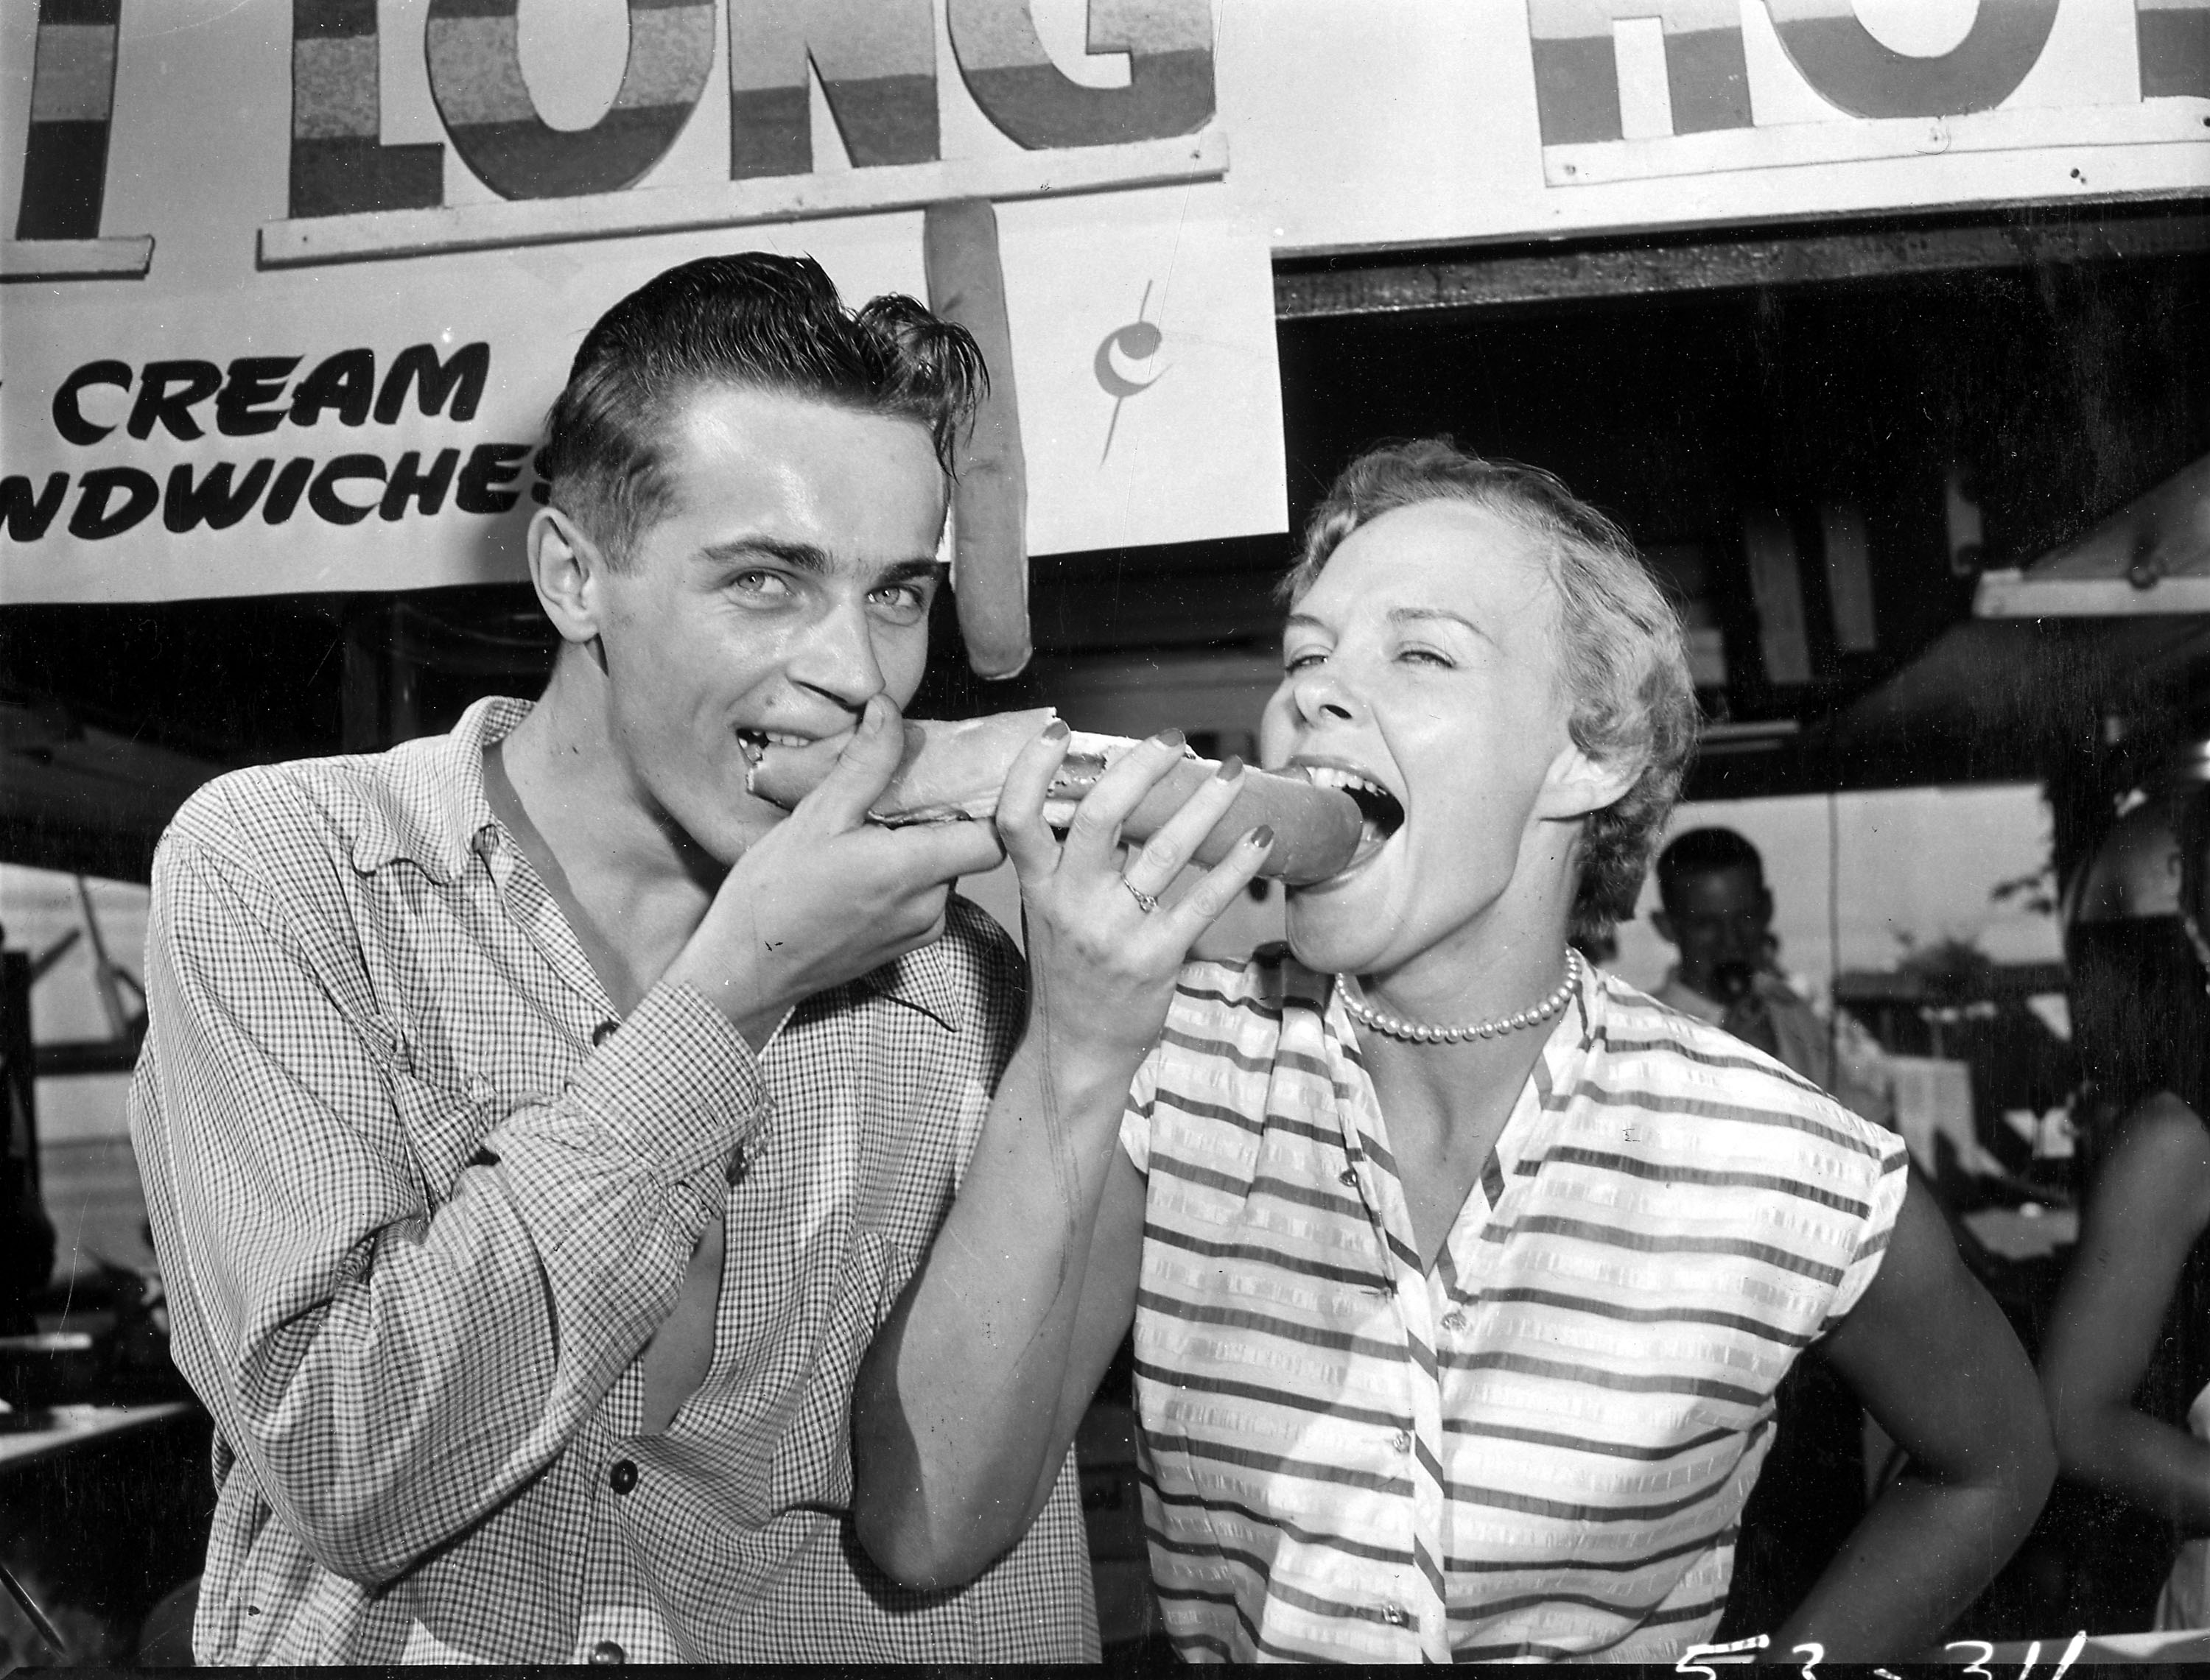 2 people sharing a hot dog